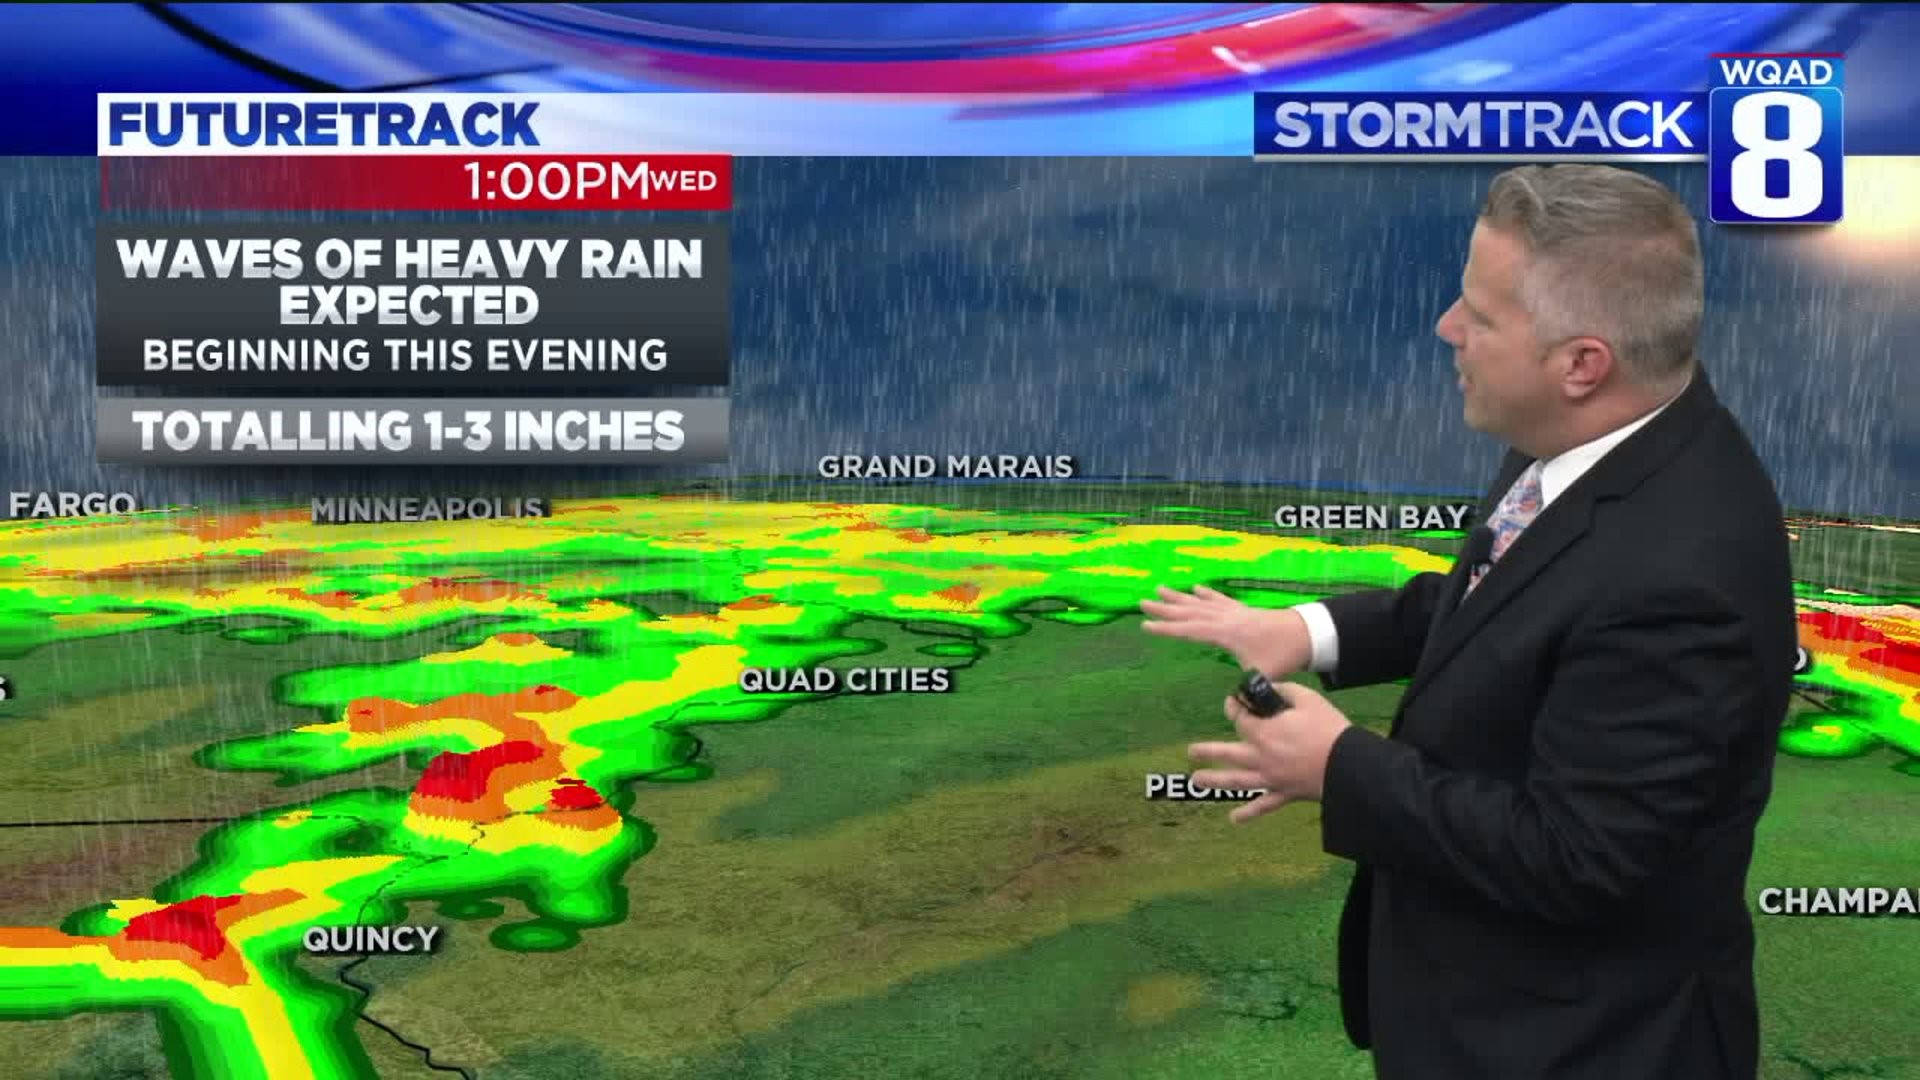 Eric is tracking more rain for tonight and Wednesday